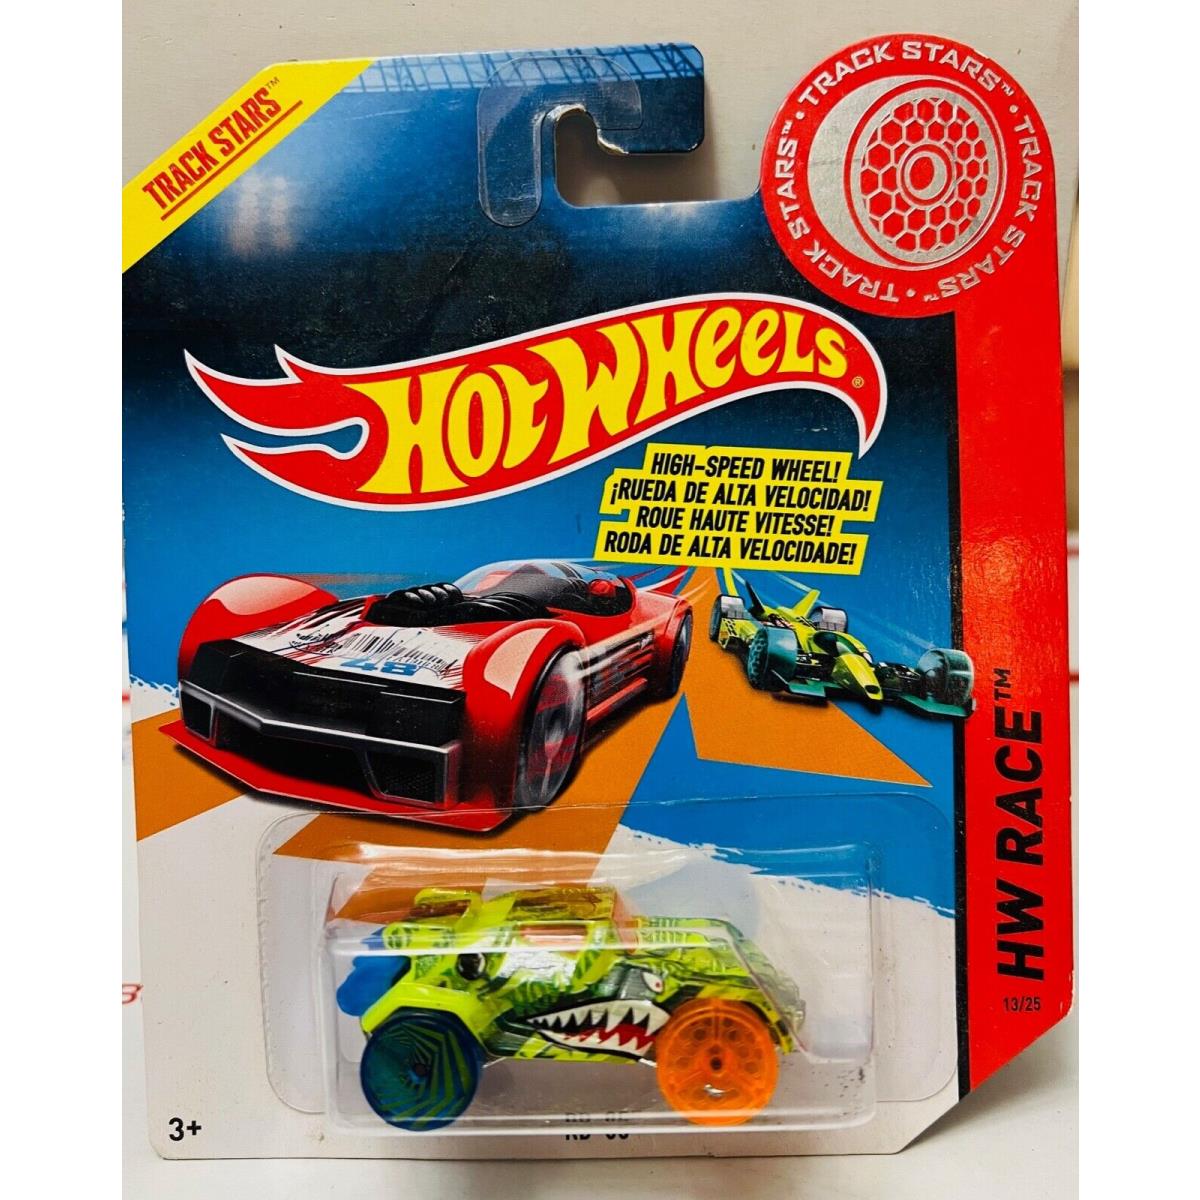 2013 Hot Wheels High Speed Wheels Track Aces RD 05 Designed For Speed